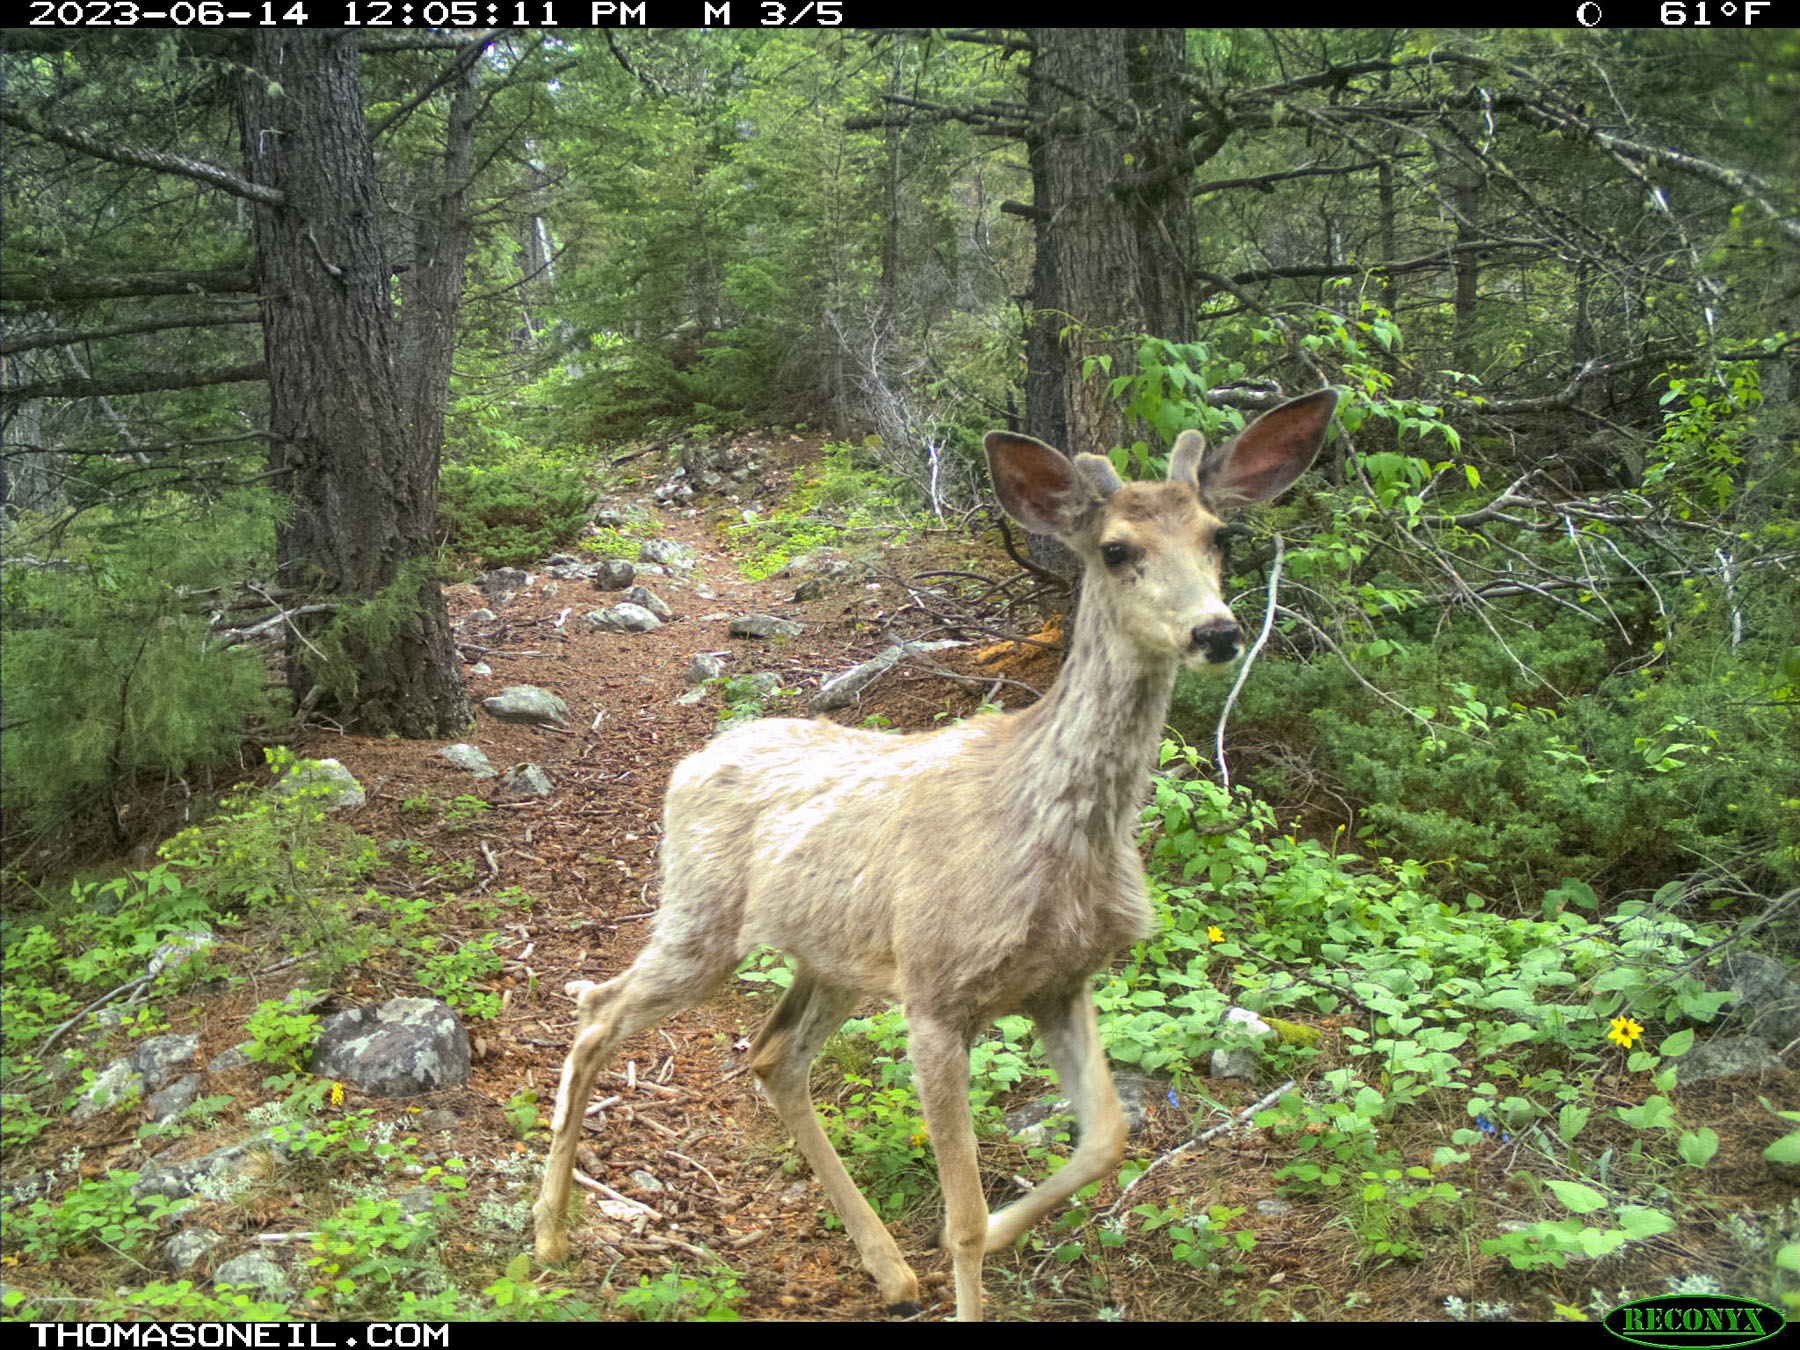 Deer on trailcam in the national forest.  Click for next photo.